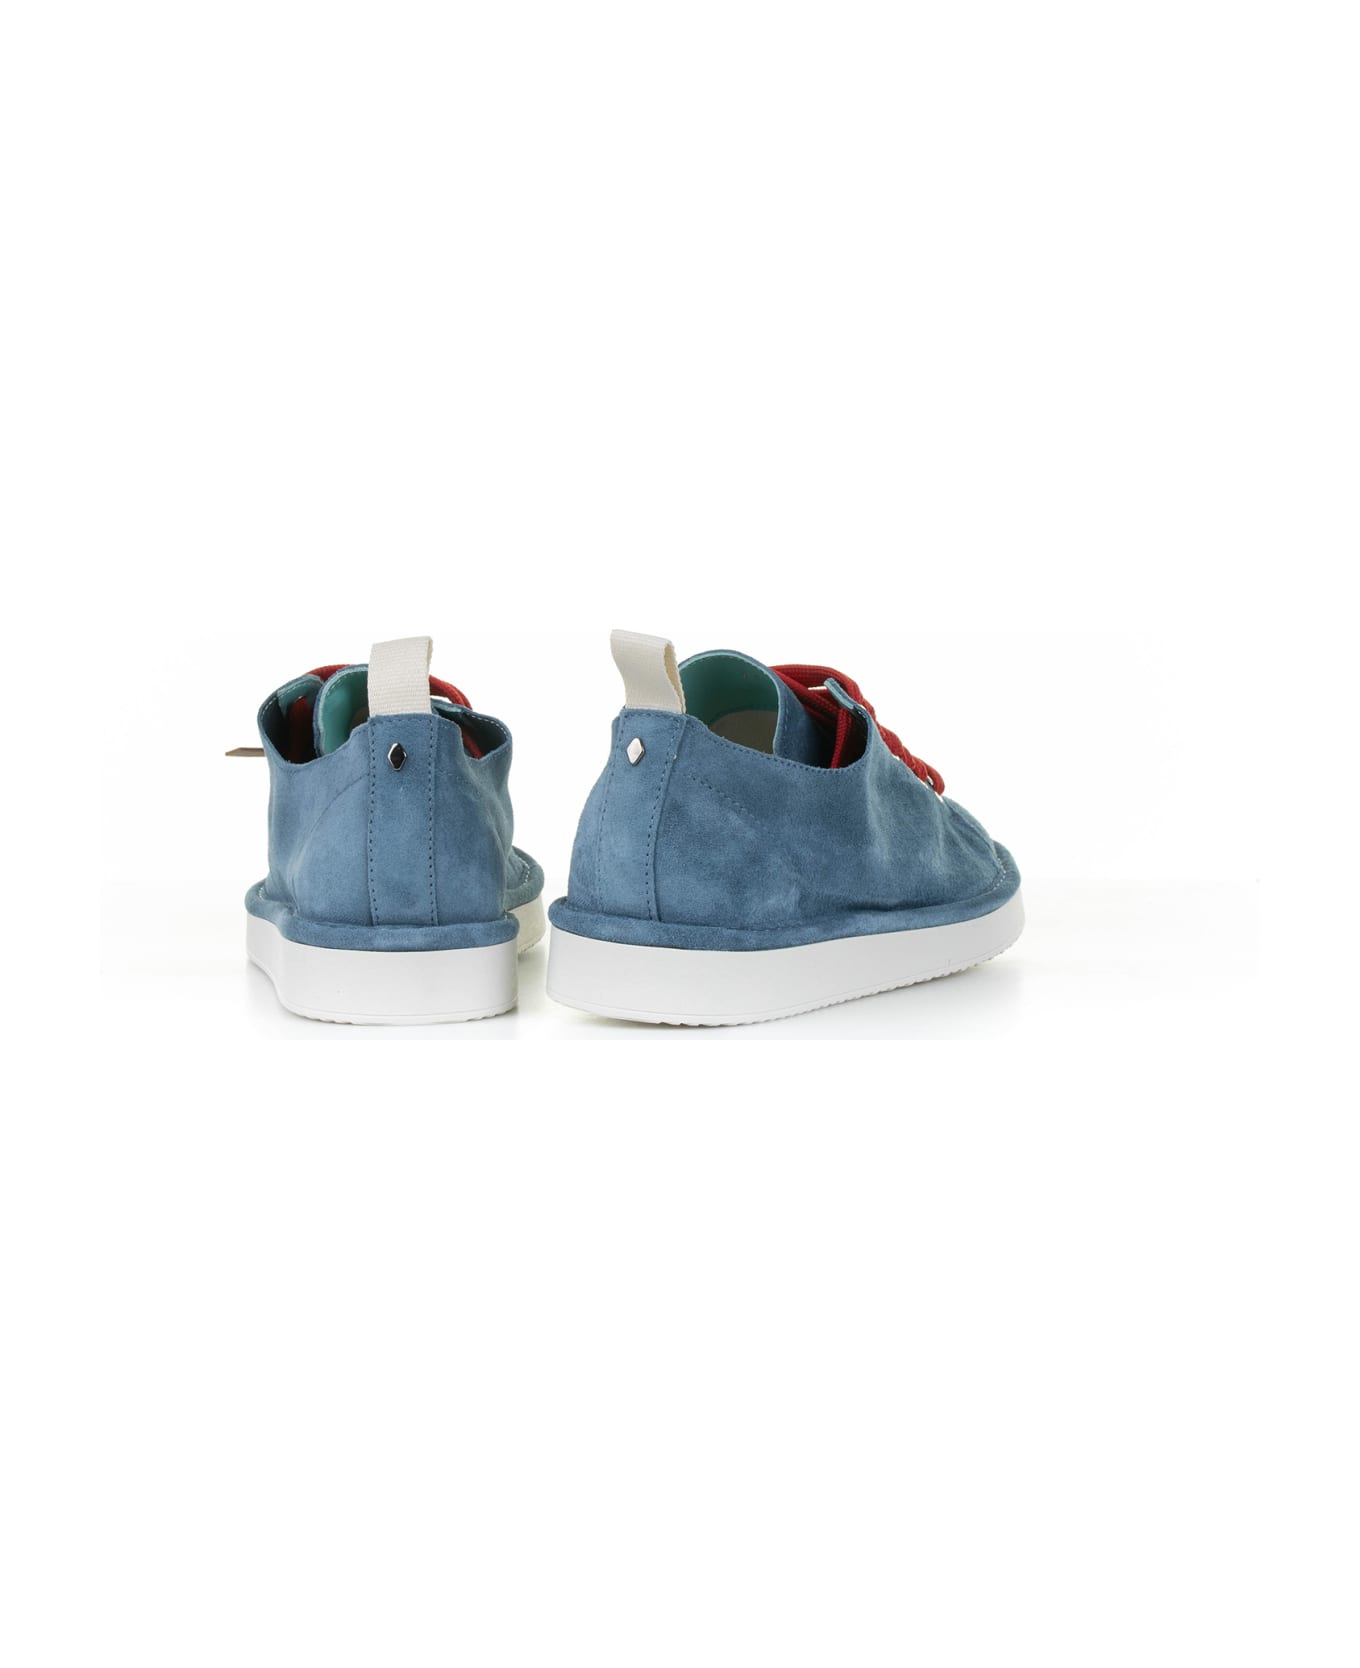 Panchic Sneaker In Blue Suede - BASIC BLUE- RED